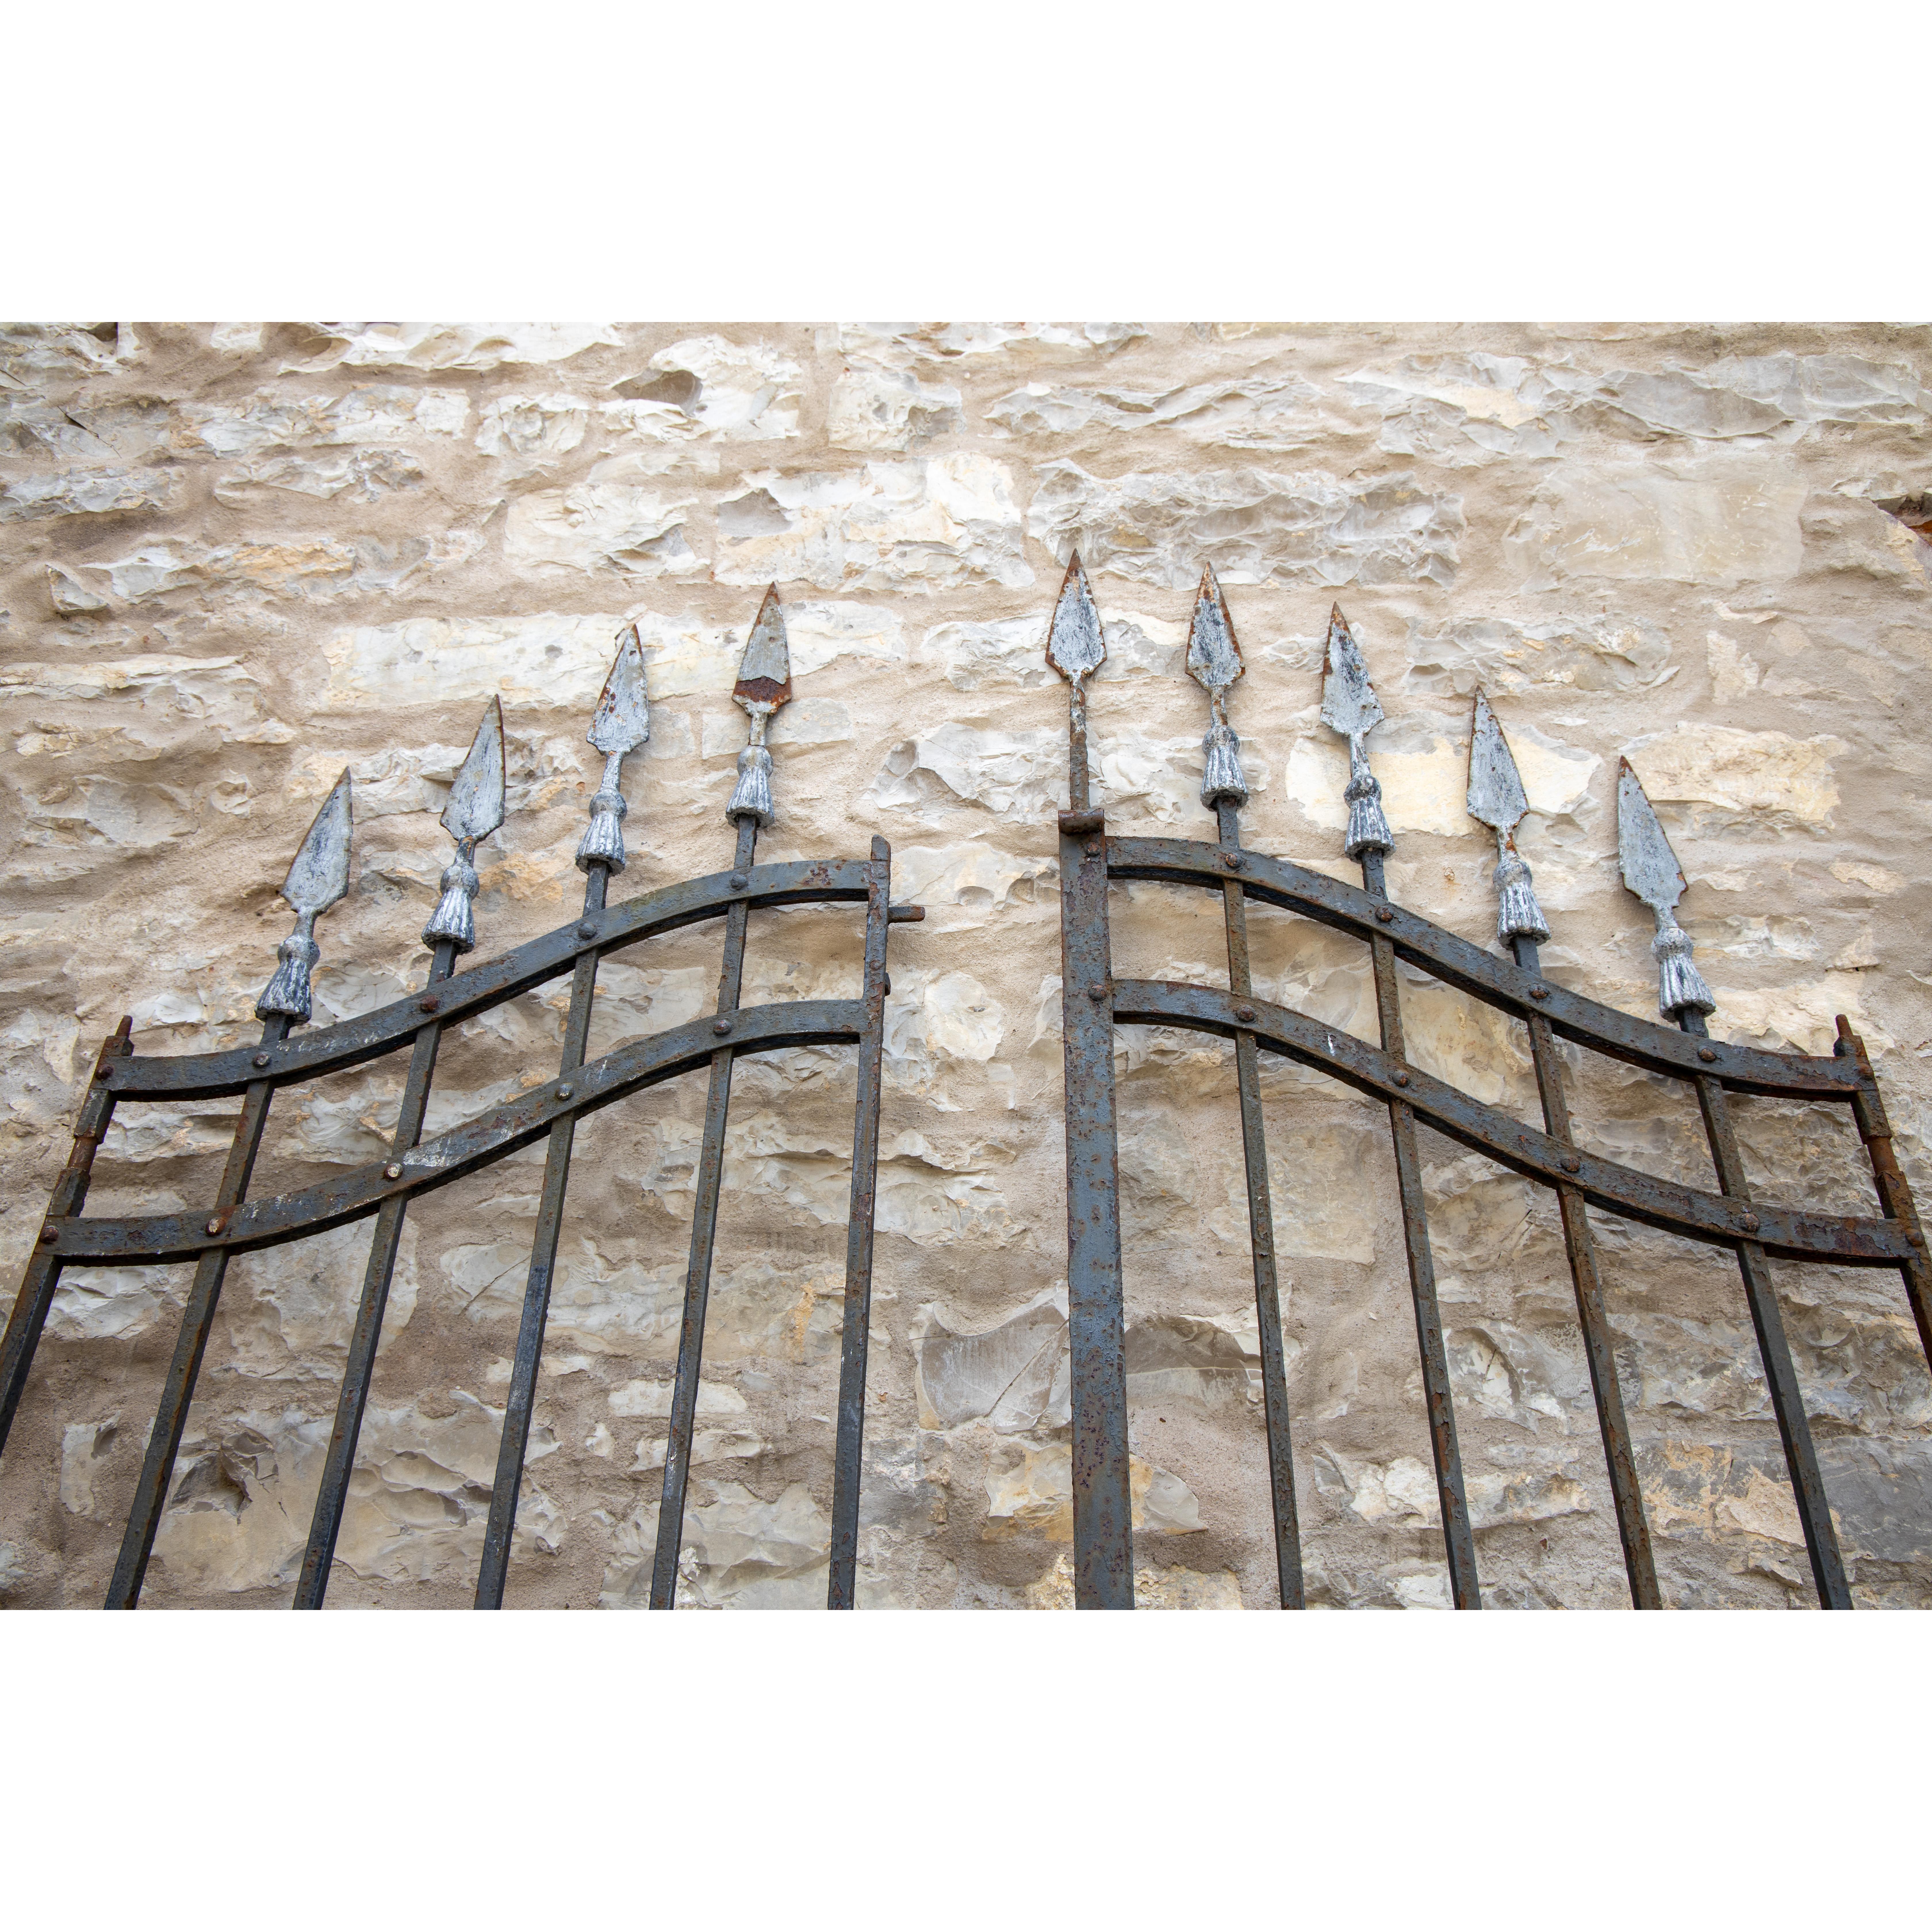 Large wrought iron court gate with two wings and an arched top with silver-patinated arrowheads.